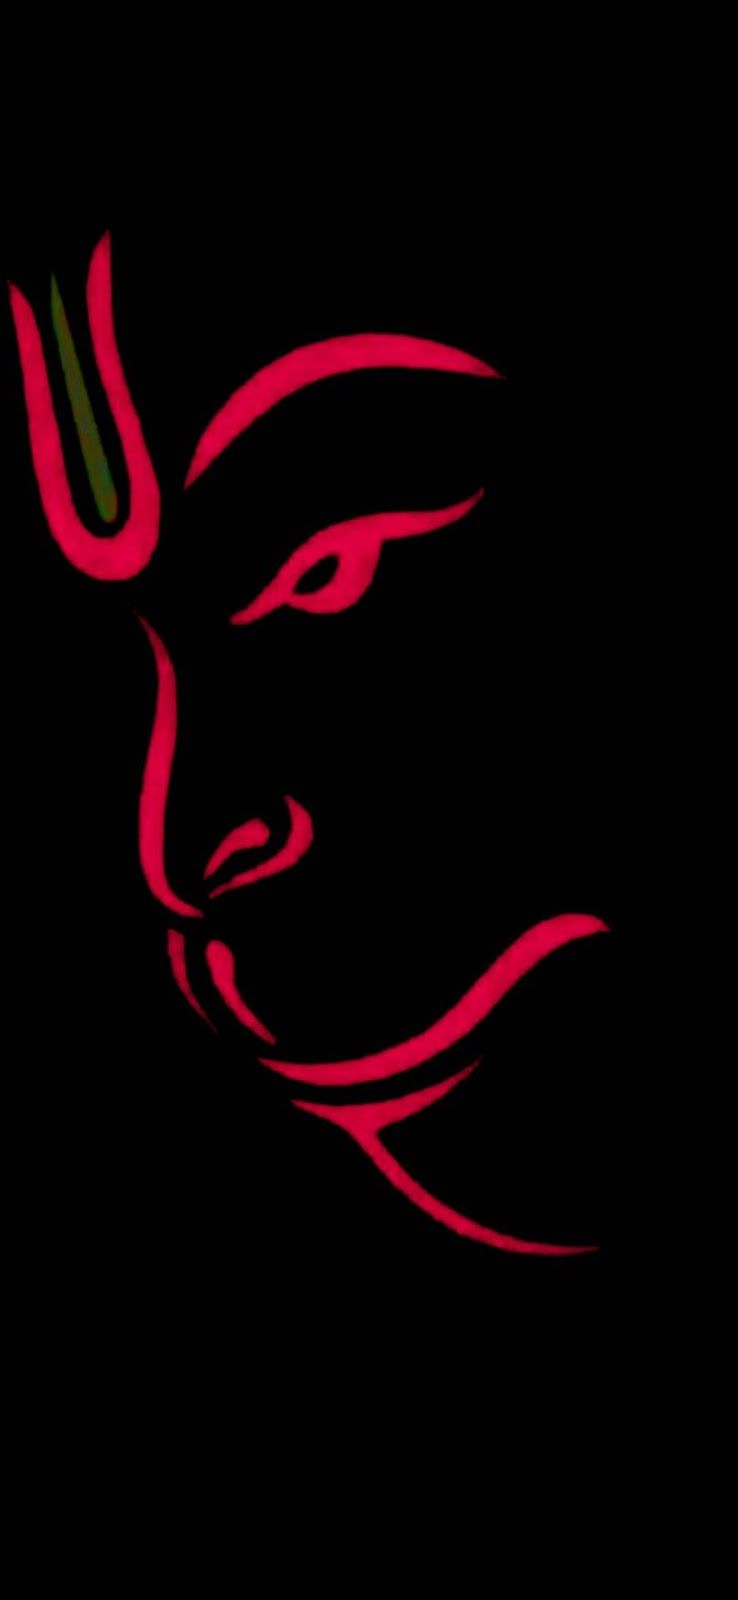 Lord Hanuman full HD Mobile Screen Wallpaper and unknown facts about Mahabali Hanuman you must know. Lord hanuman, Hanuman, Lord hanuman wallpaper